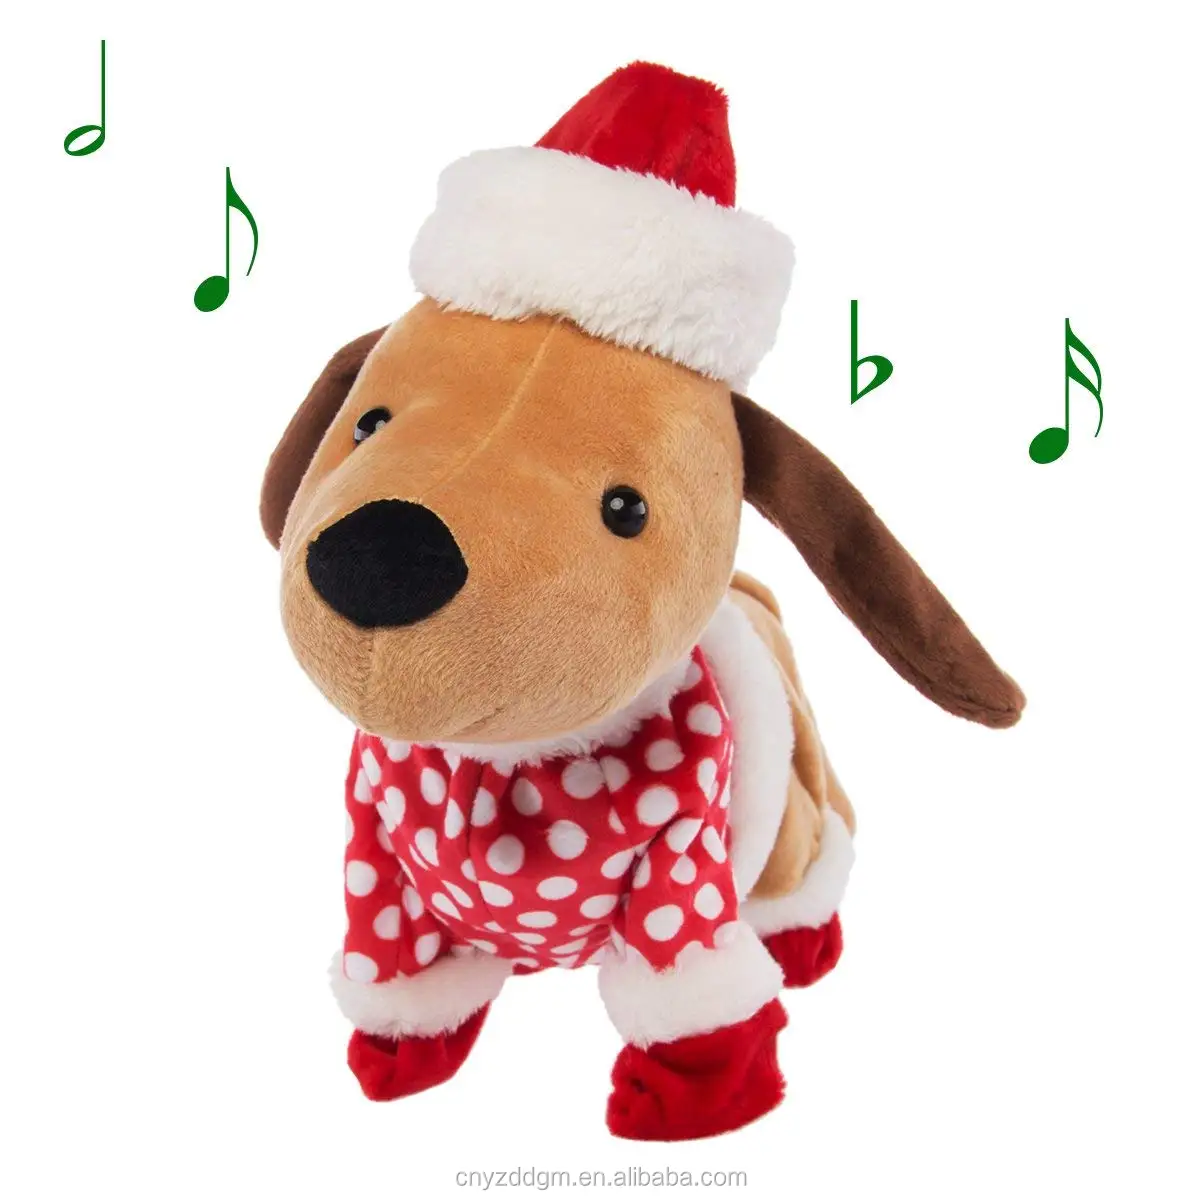 Simply Funny Animated Plush Toy Dog Doll Singing Dancing Christmas Holiday  Stuffed Animal Toys For Decor & Decorations - Buy Funny Animated Plush  Toy,Plush Toy Dog Doll,Christmas Holiday Stuffed Animal Toys Product